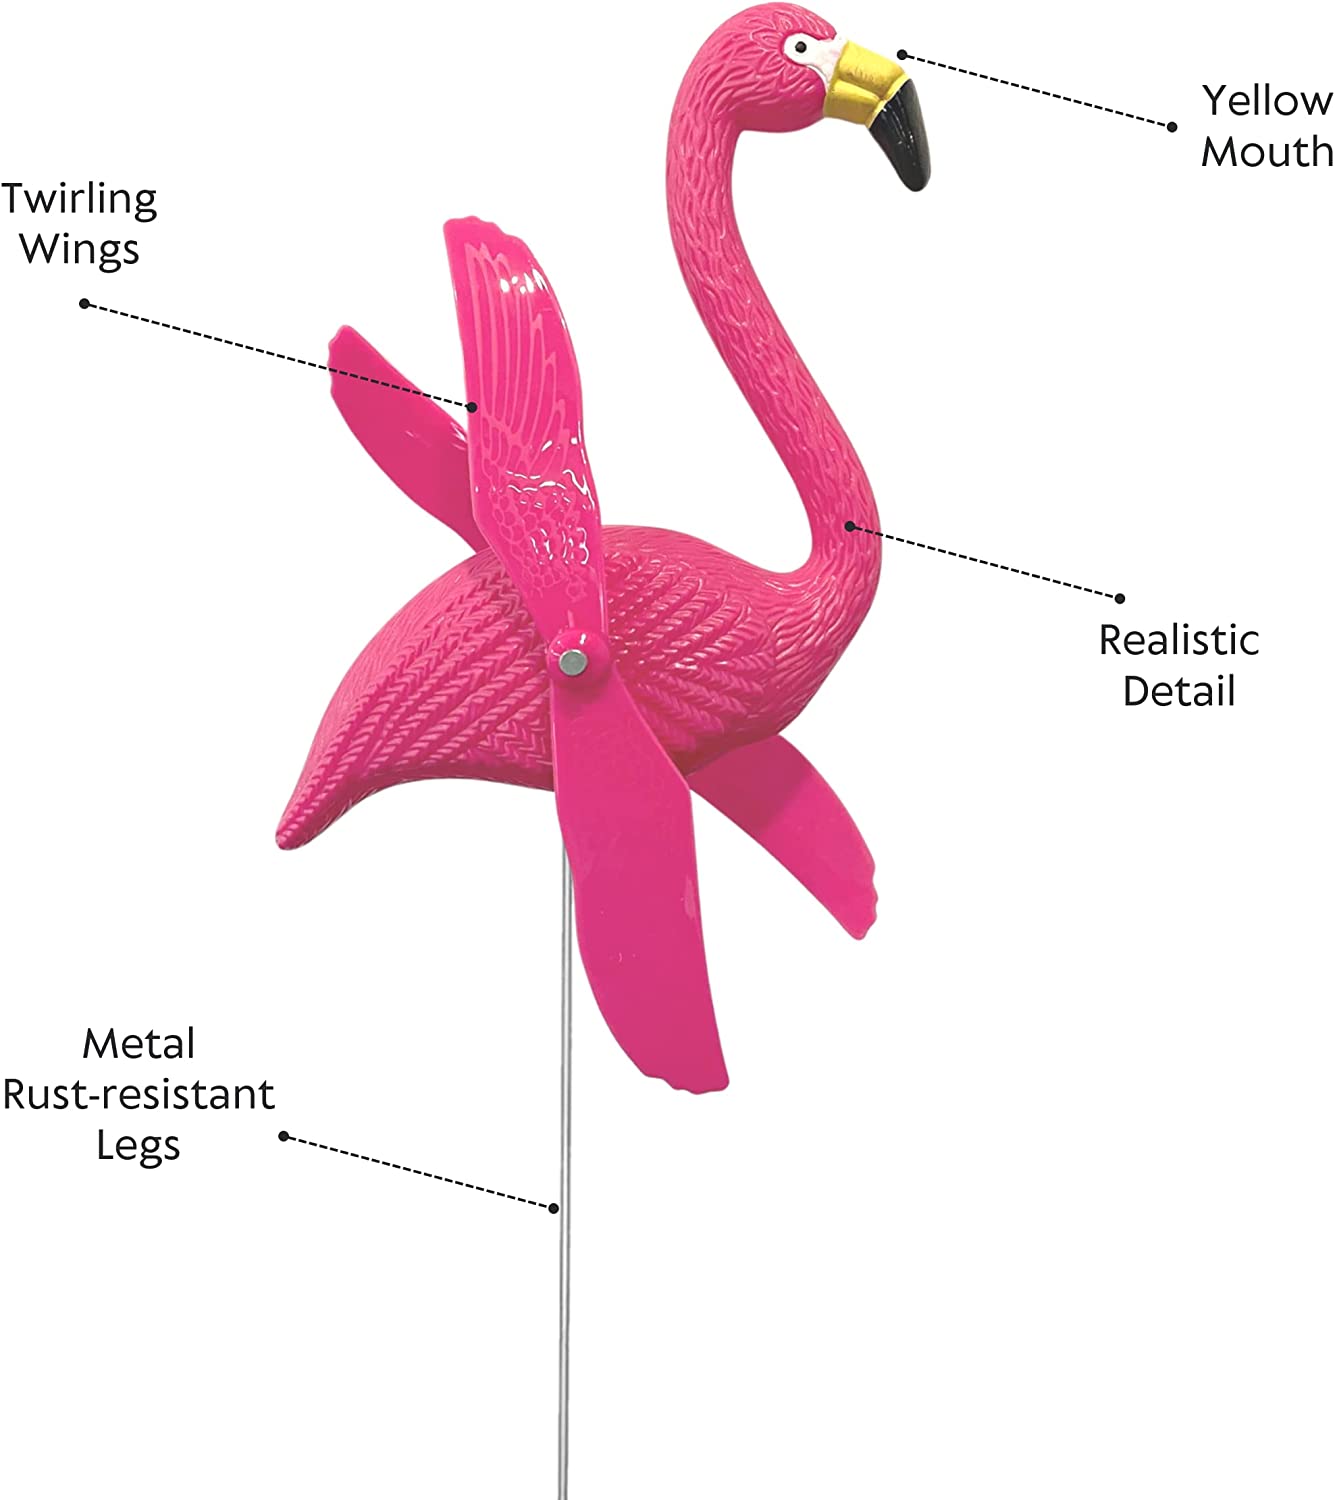 12 Pcs Twirling Wings Pink Flamingo Yard Decorations Small - Flamingo Yard Ornament with Metal Stakes for Outdoor Lawn Decor Garden Statues by 4E's Novelty